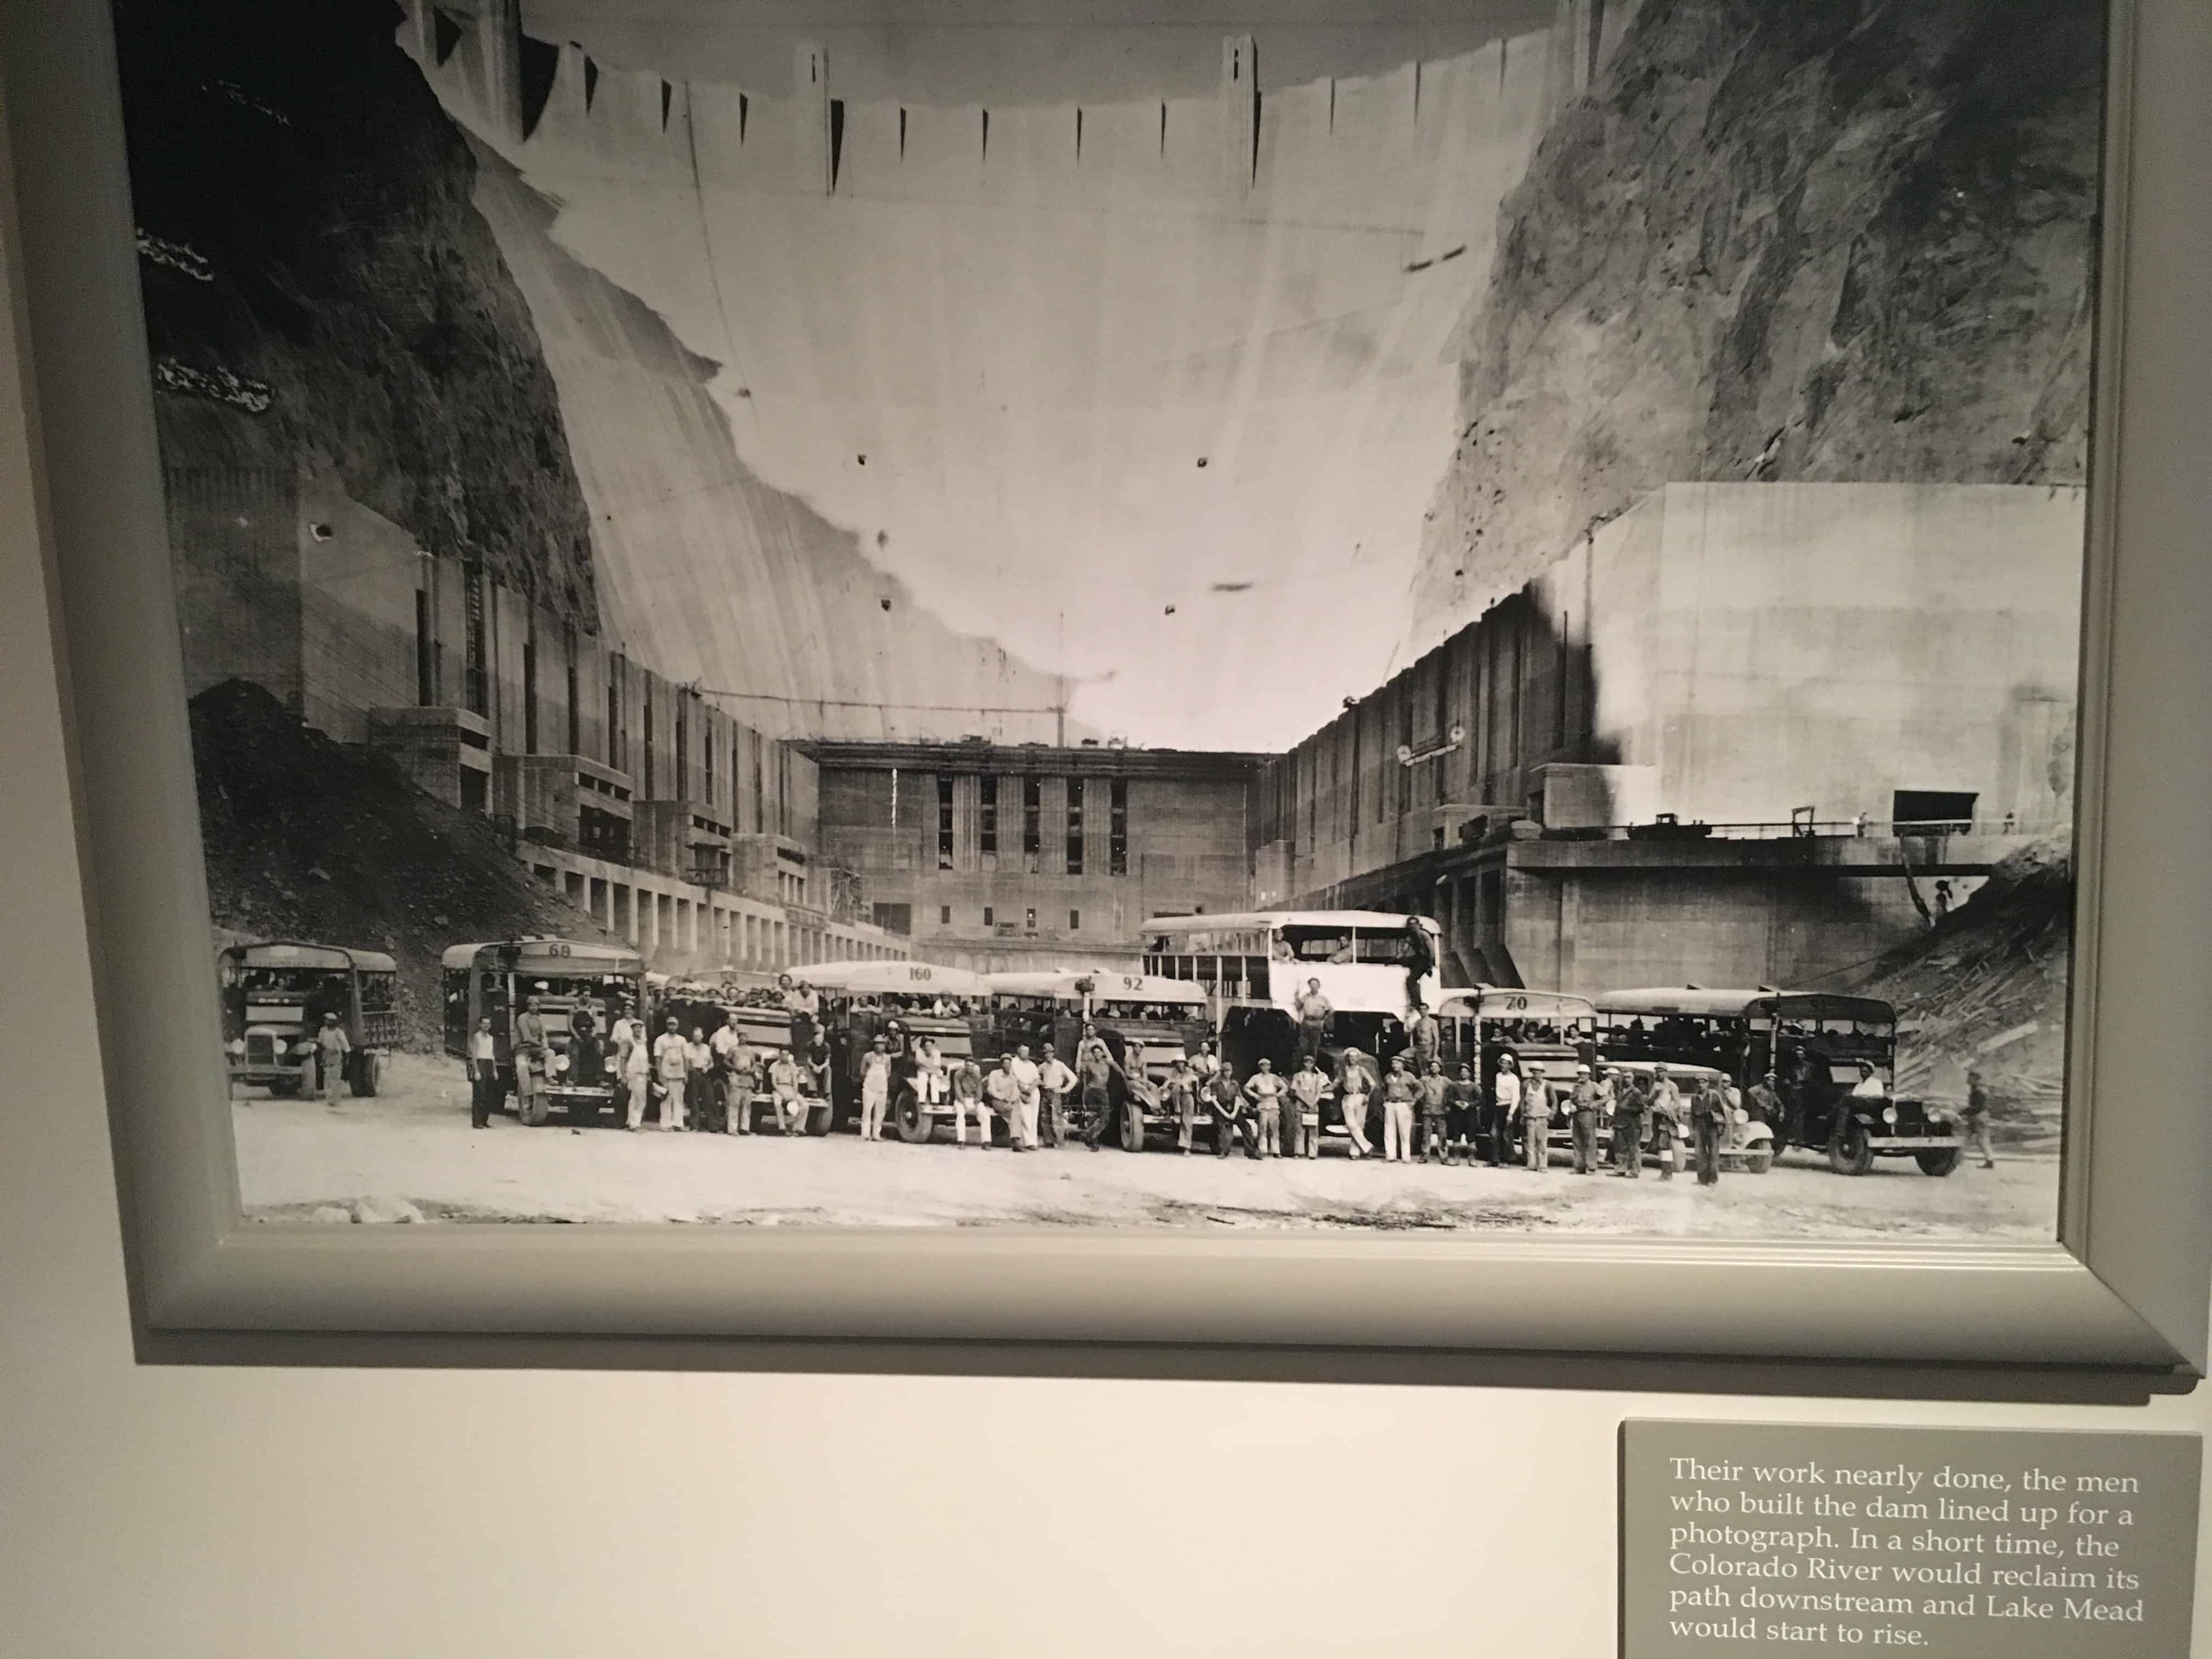 The last photo taken before the floodgates opened at the Boulder City/Hoover Dam Museum in Boulder City, Nevada